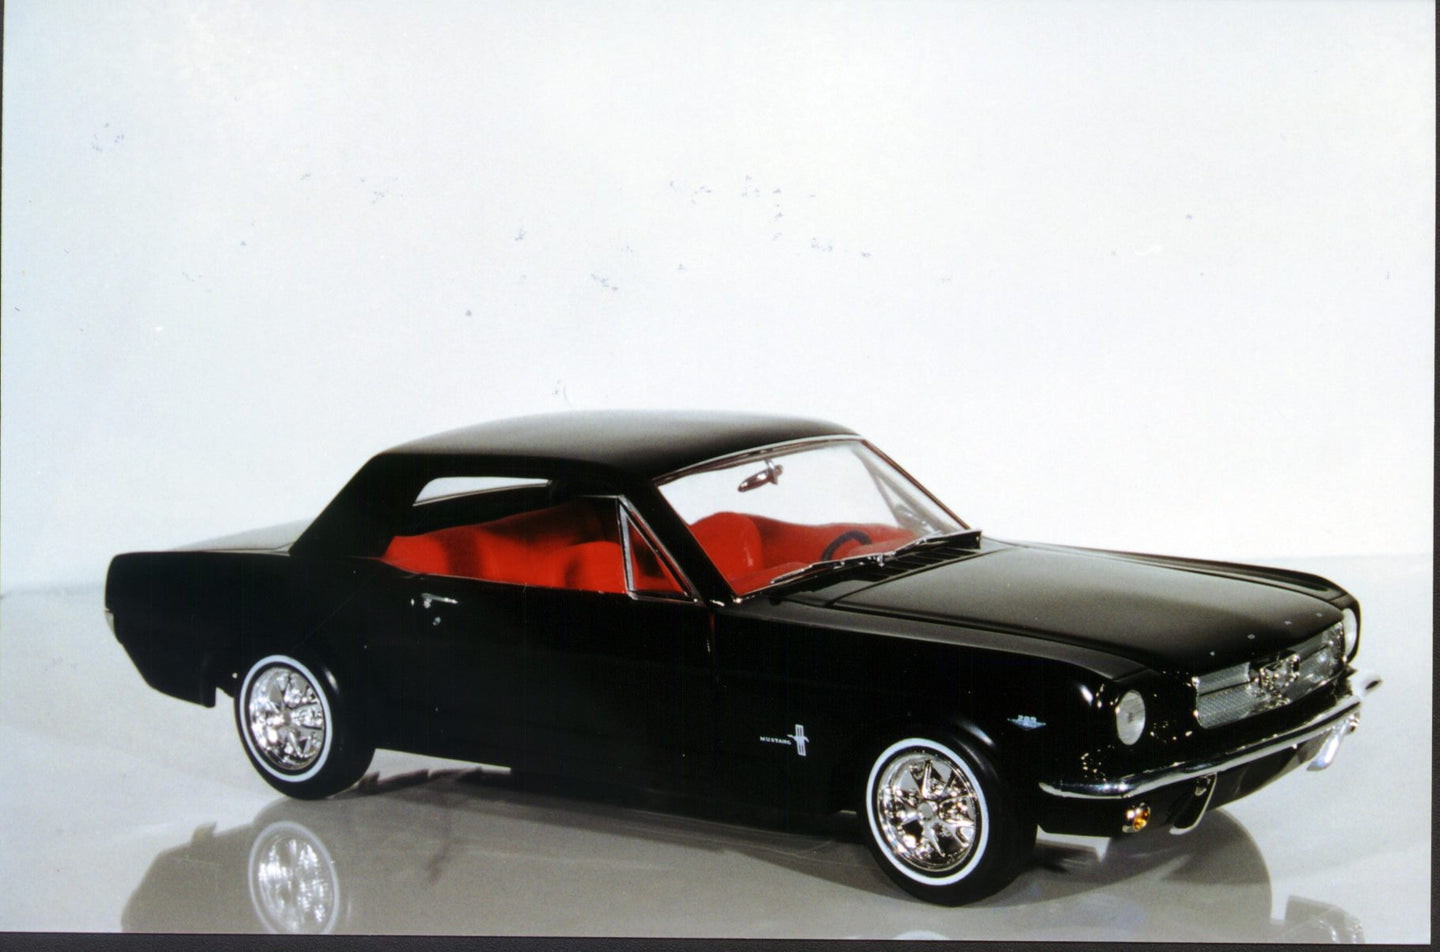 1:18 Mira Ford Mustang '64 1/2 HT